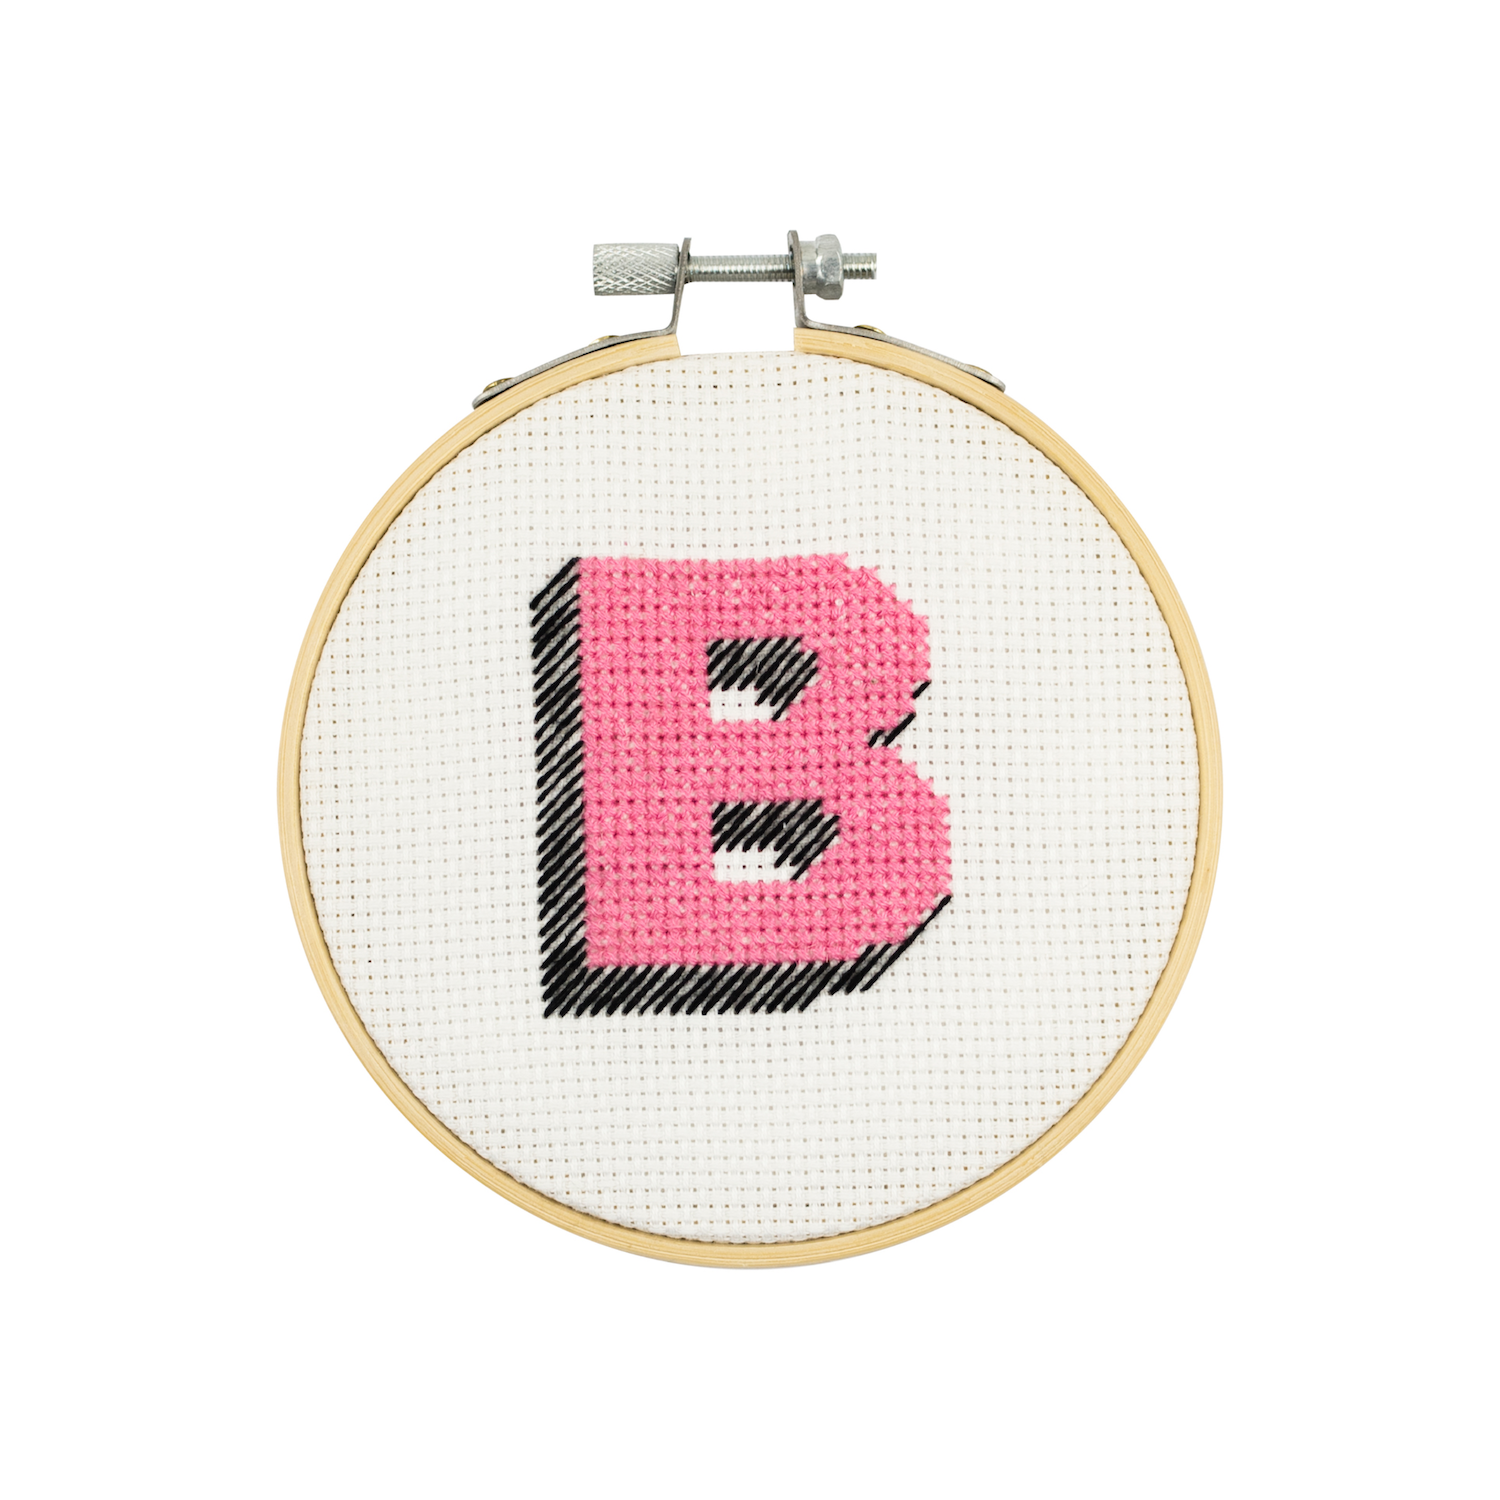 G Letter Embroidery Kit Letter Embroidery Design With -  UK  Hand  embroidery letters, Embroidery gifts, Embroidery hoop art